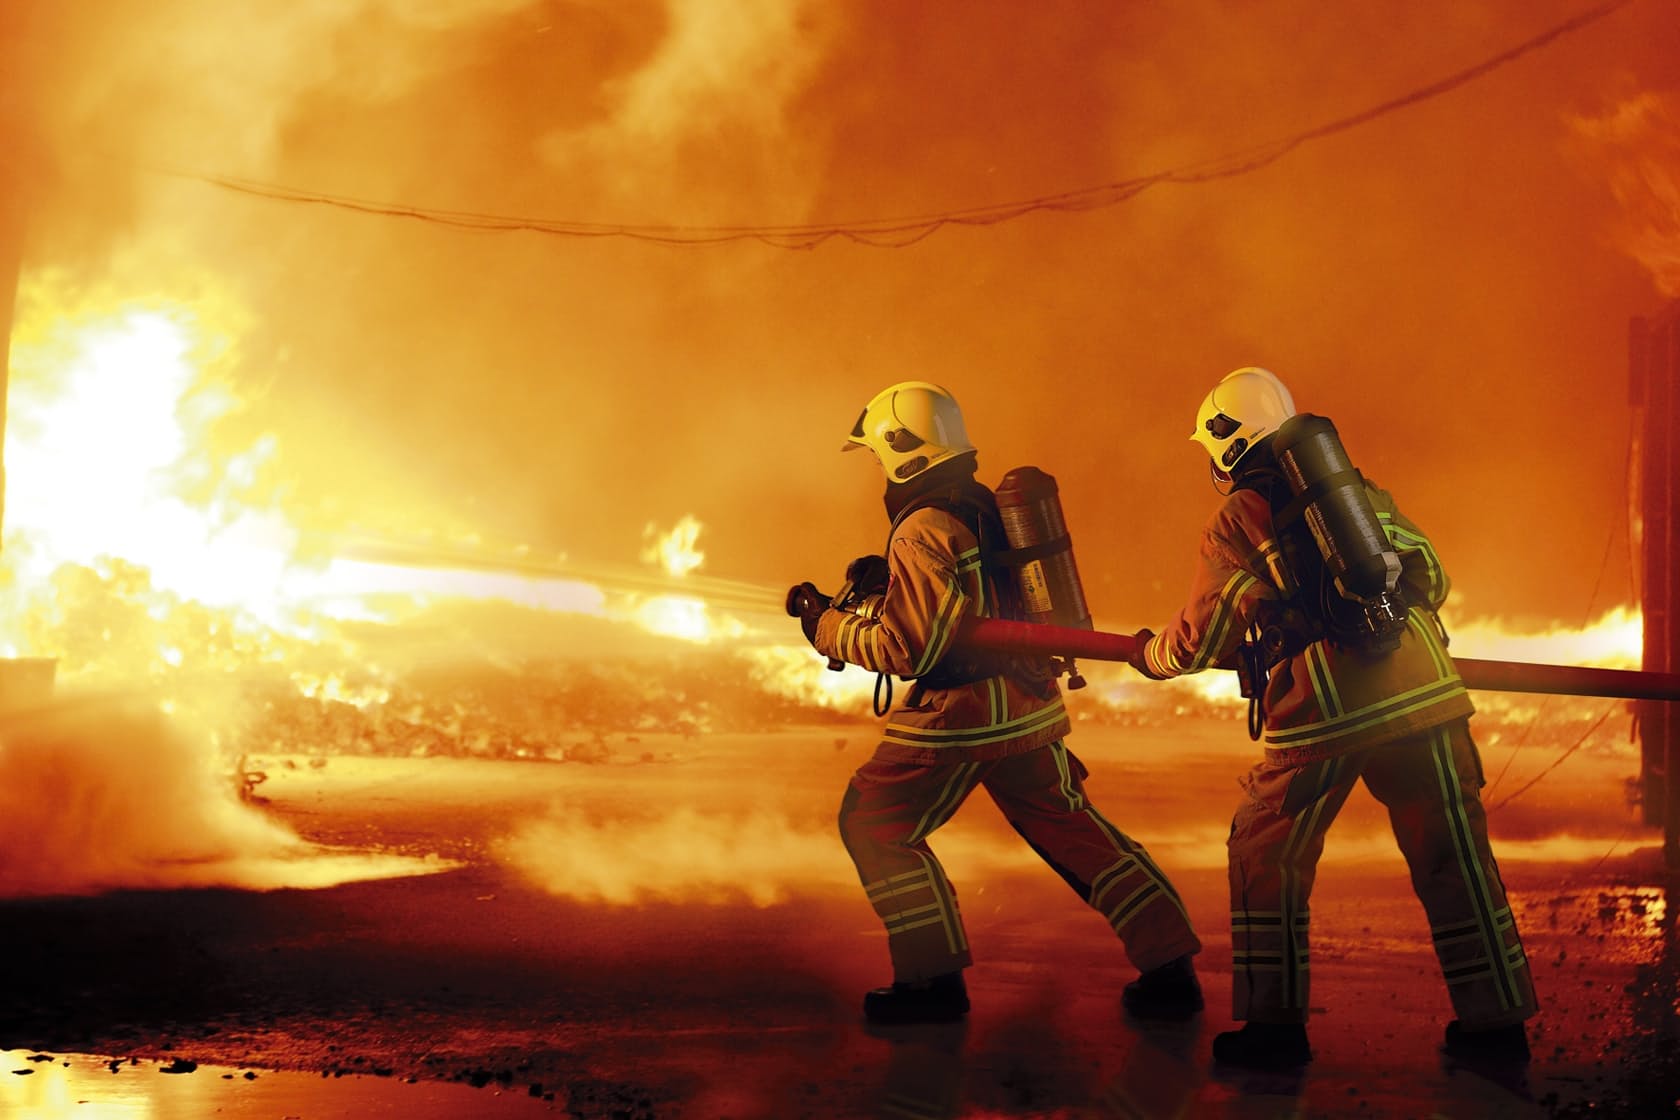 Firefighters. They risk their lives to save you, when tragedy strikes. Many of the risks could be avoided, as many people burn their property for insurance money or to be the... star of YouTube.